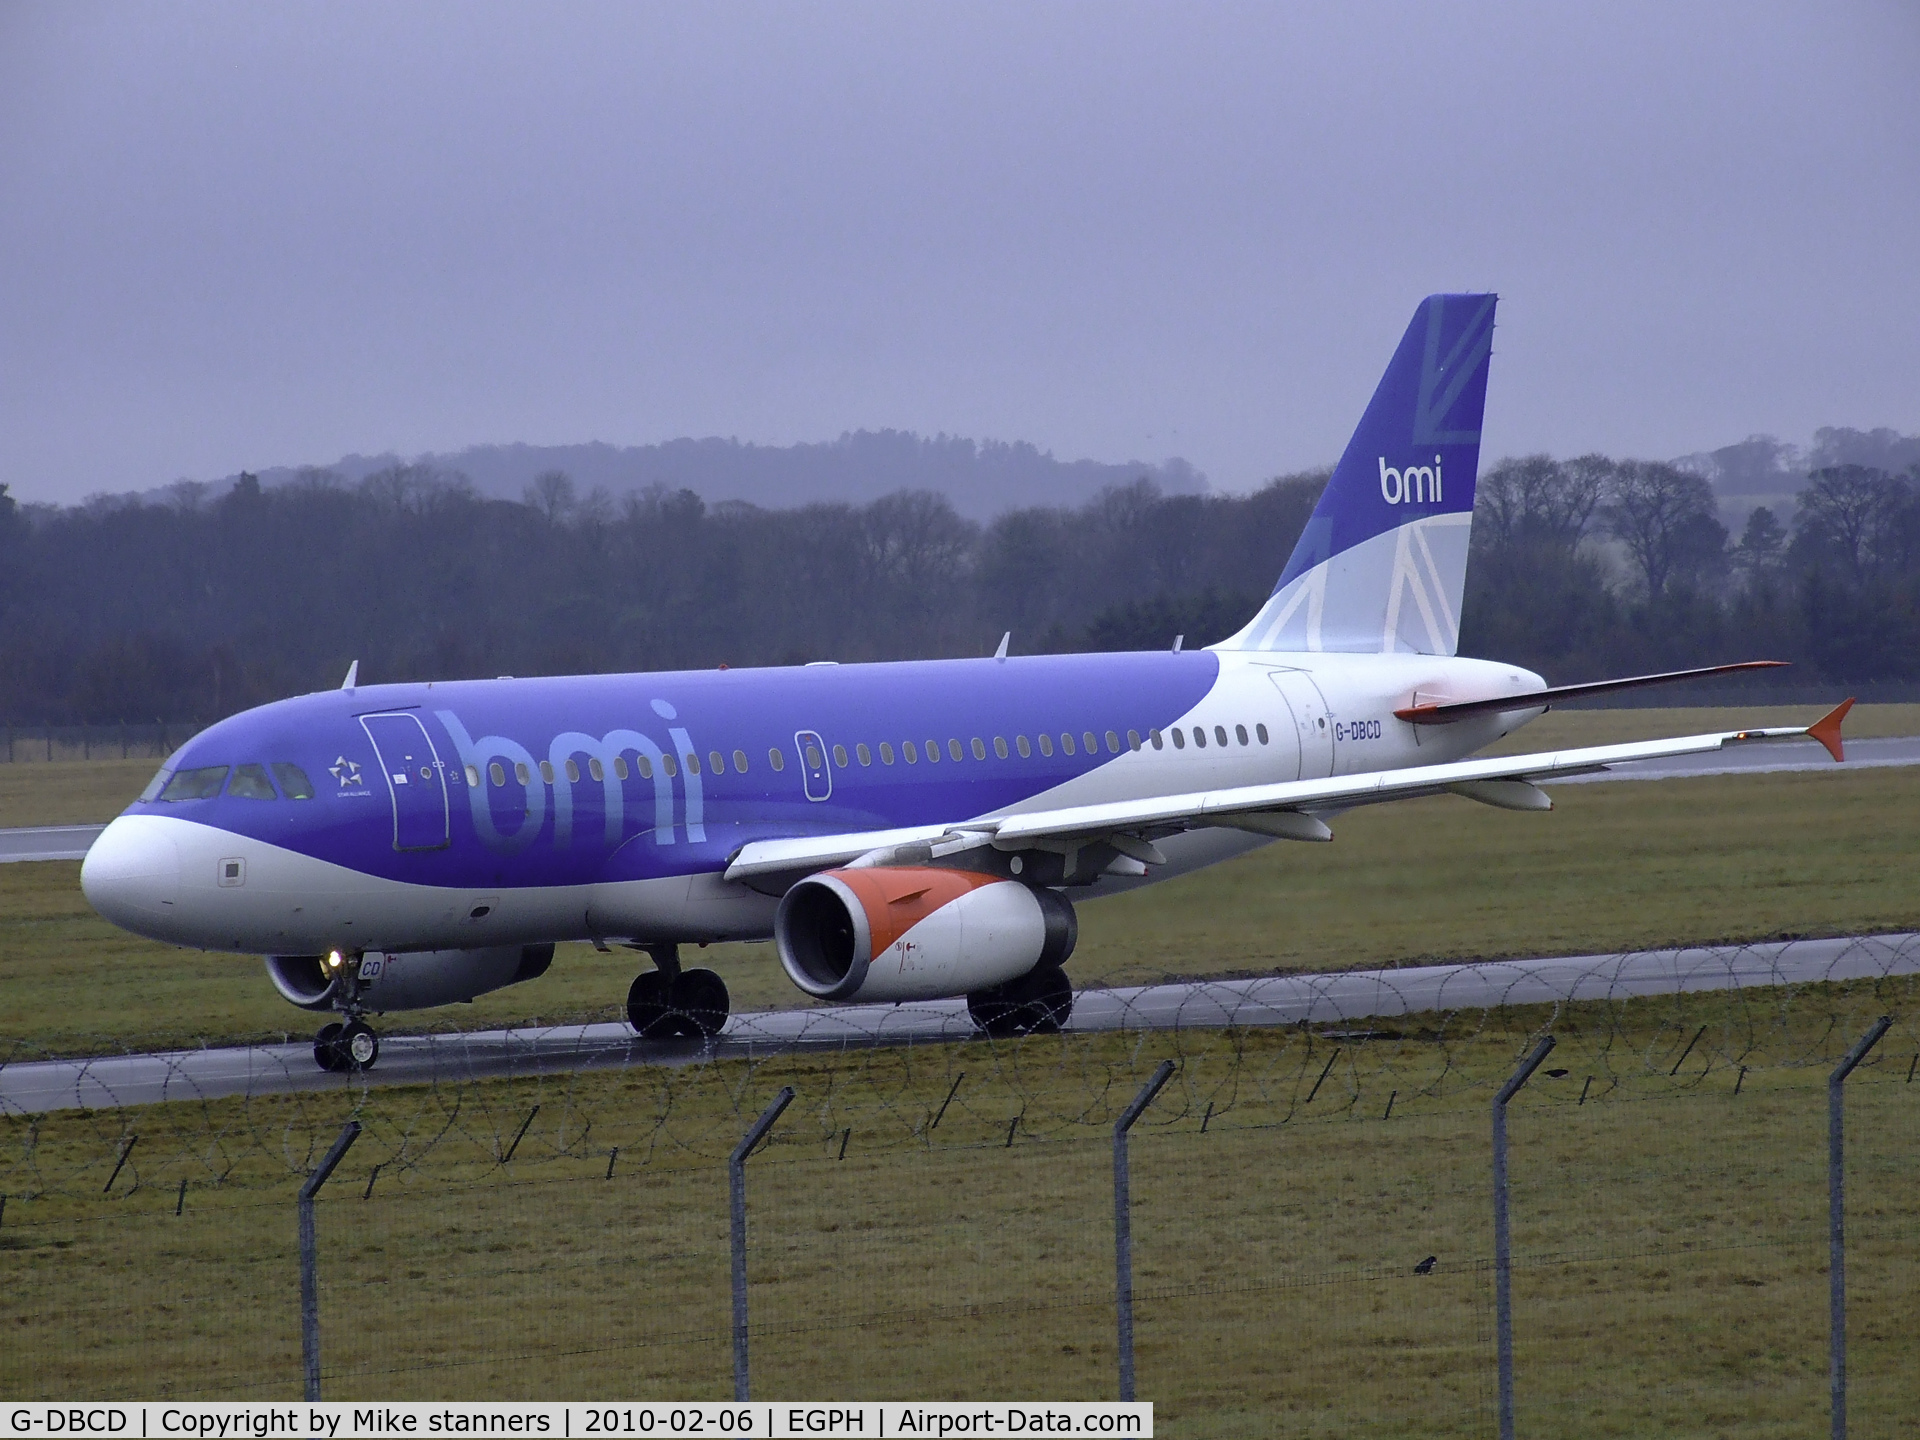 G-DBCD, 2005 Airbus A319-131 C/N 2389, BMI A319 Taxiing to runway 06